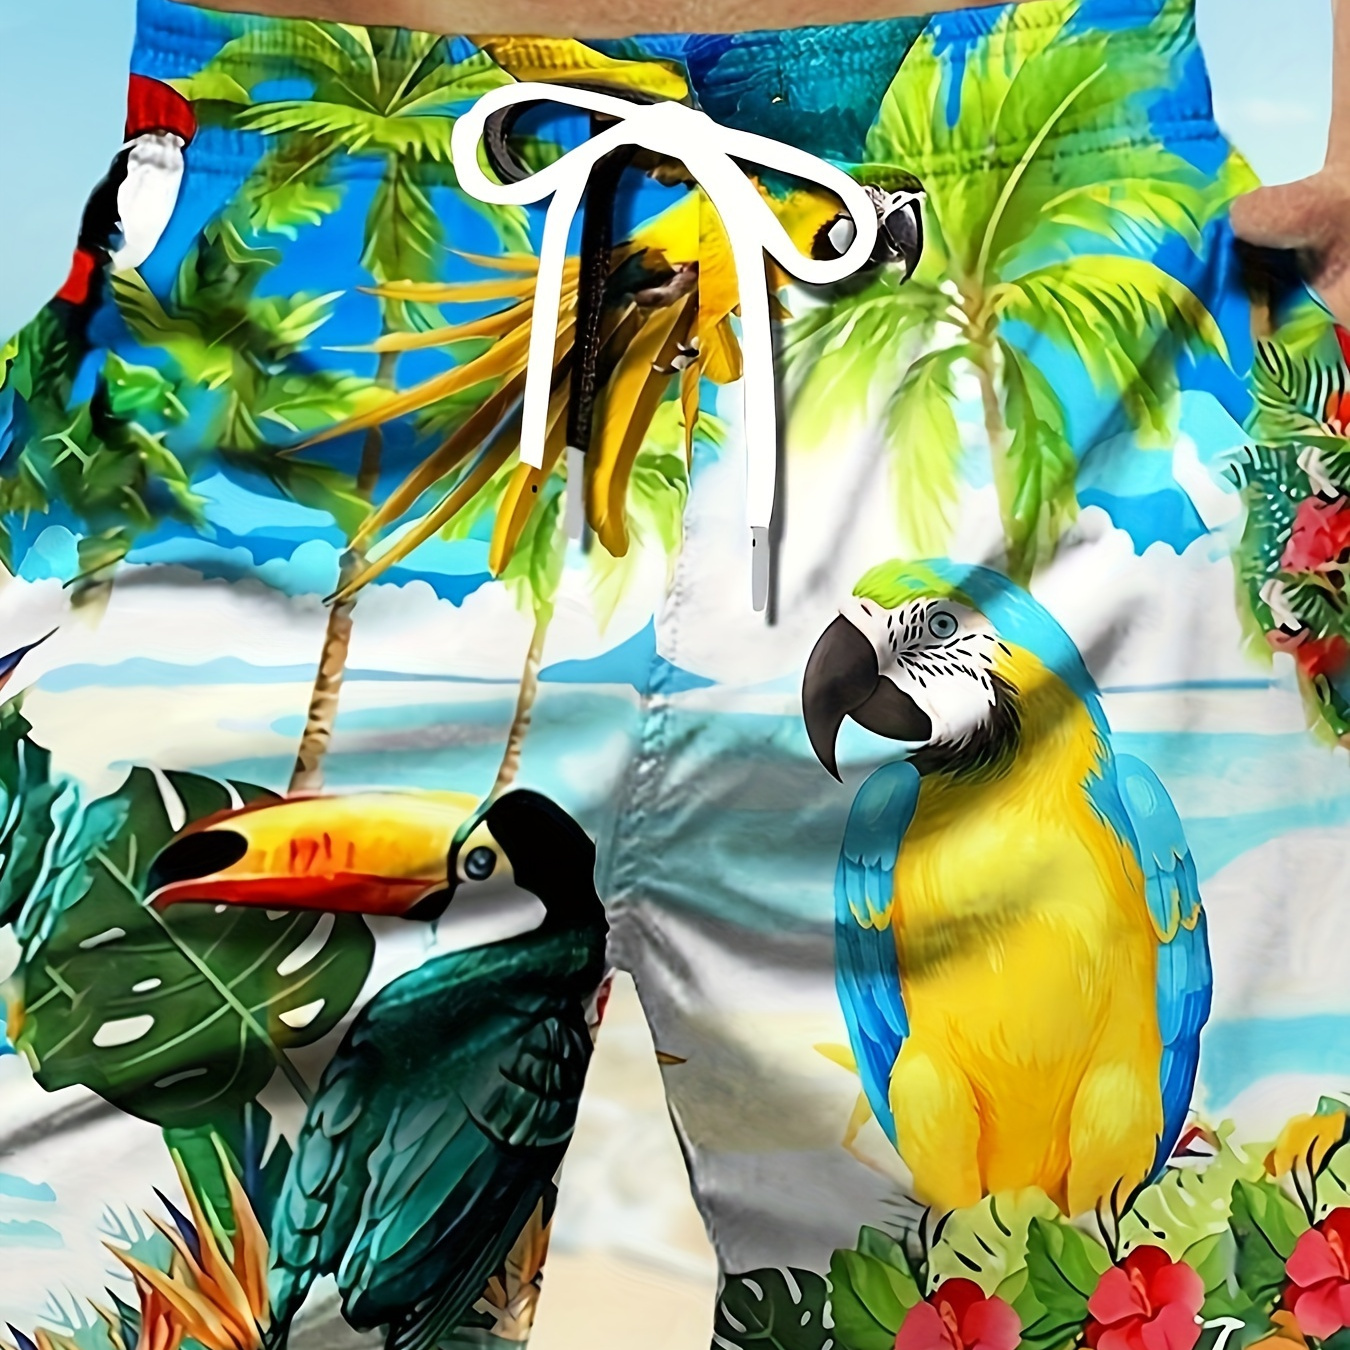 

Hawaii Theme Parrots Print Fashionable Men's Summer Drawstring Casual Sports Loose Shorts, Suitable For Outdoor Sports, Comfortable And Versatile